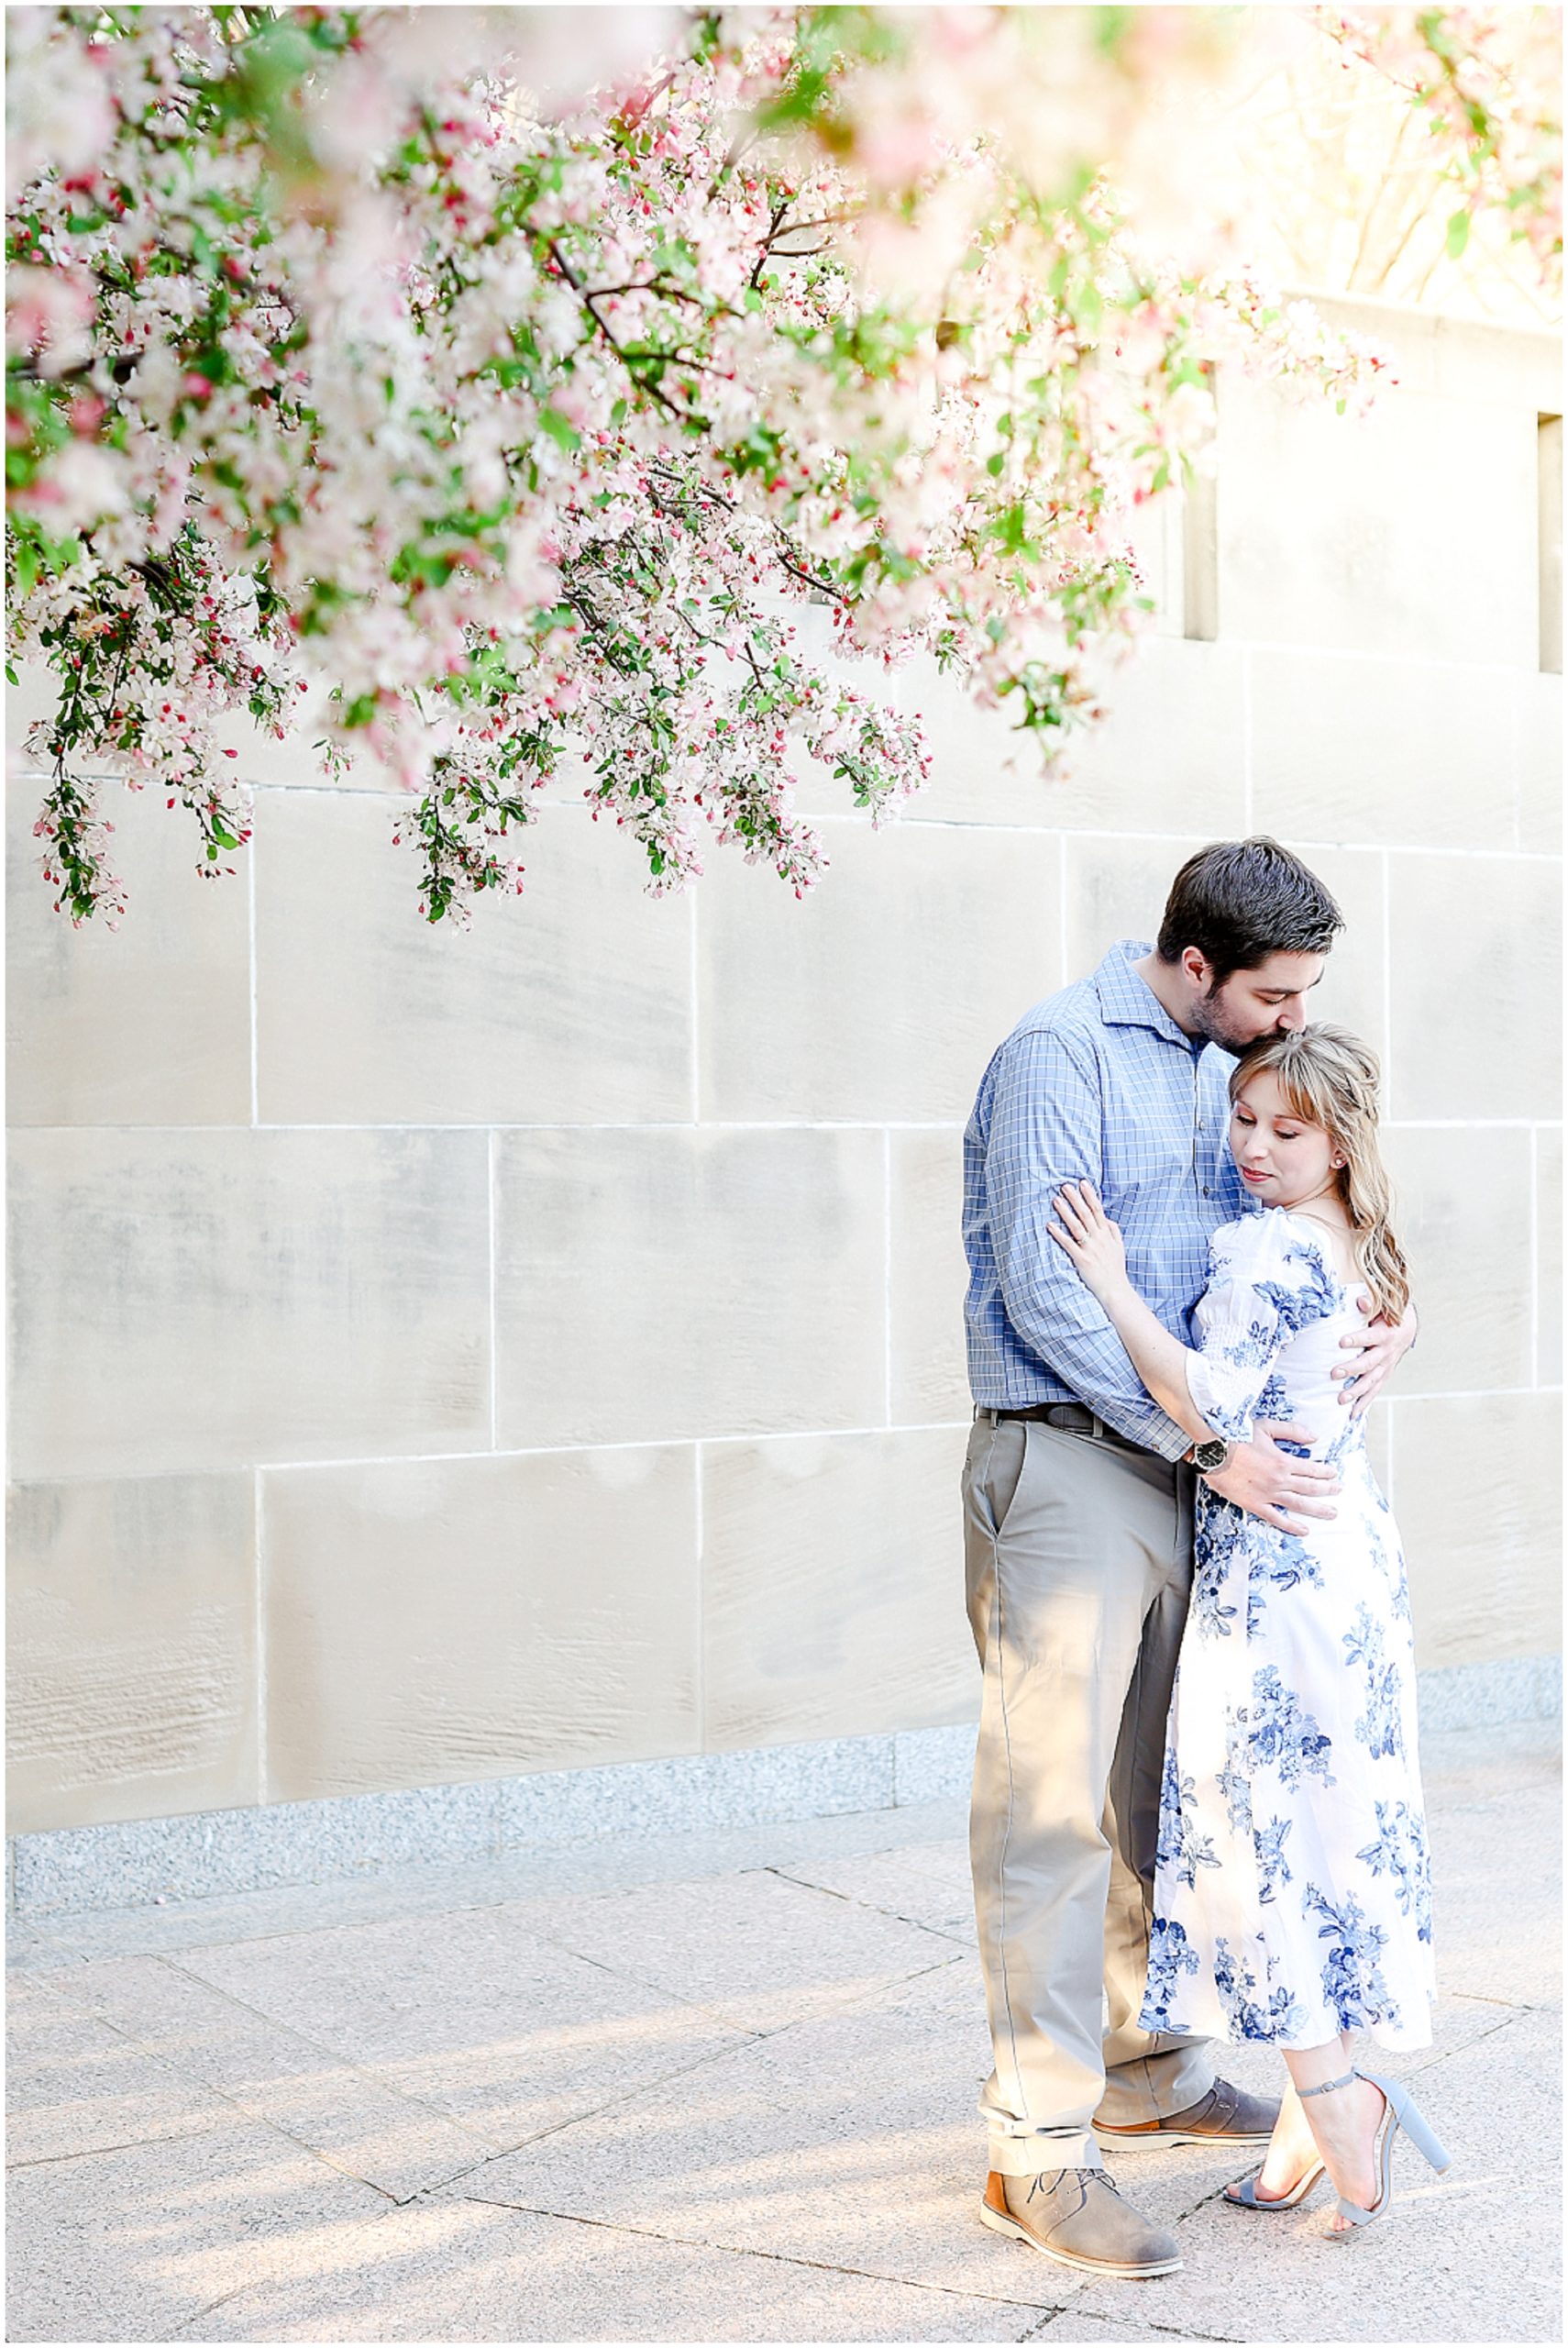 Look at what they wore for their engagement photos! Spring Engagement Photos with Ali & Connor at the Nelson Atkins Museum in Kansas City by best wedding photographer Mariam Saifan Photography - Engagement and Wedding Style Guide - What to Wear and Where to Take Your Photos in Kansas City - beautiful photos in kansas overland park family photos 